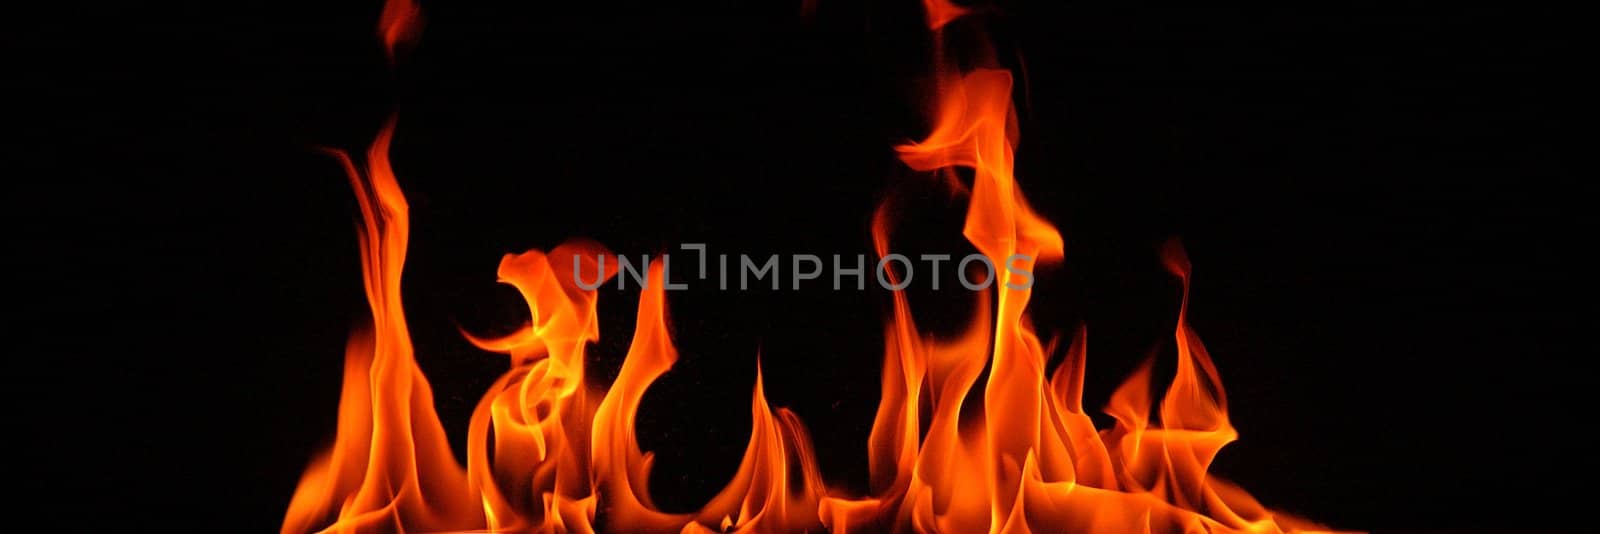 Close-up of fire and flames on a black background by ozaiachin